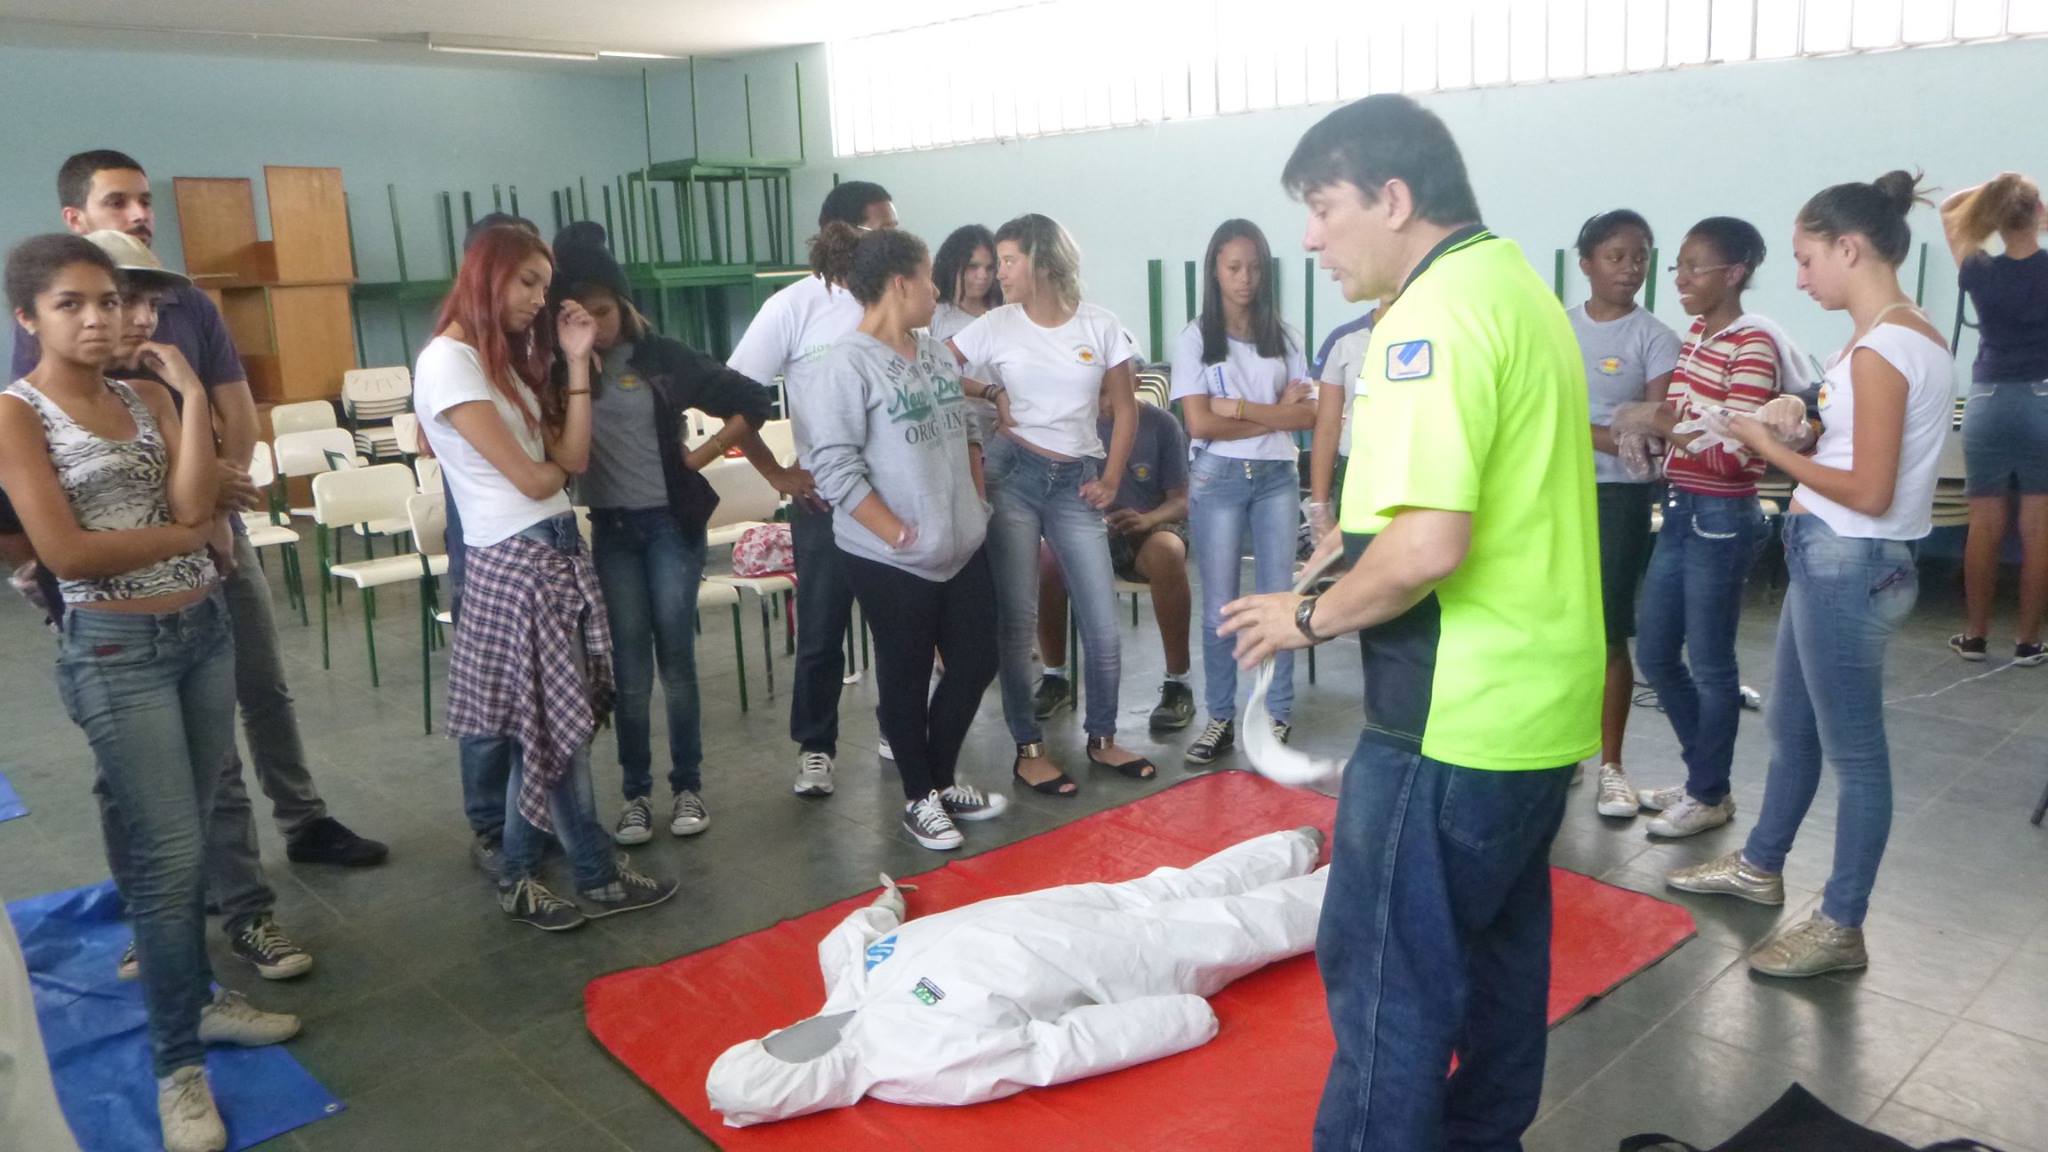 First aid lesson at local school